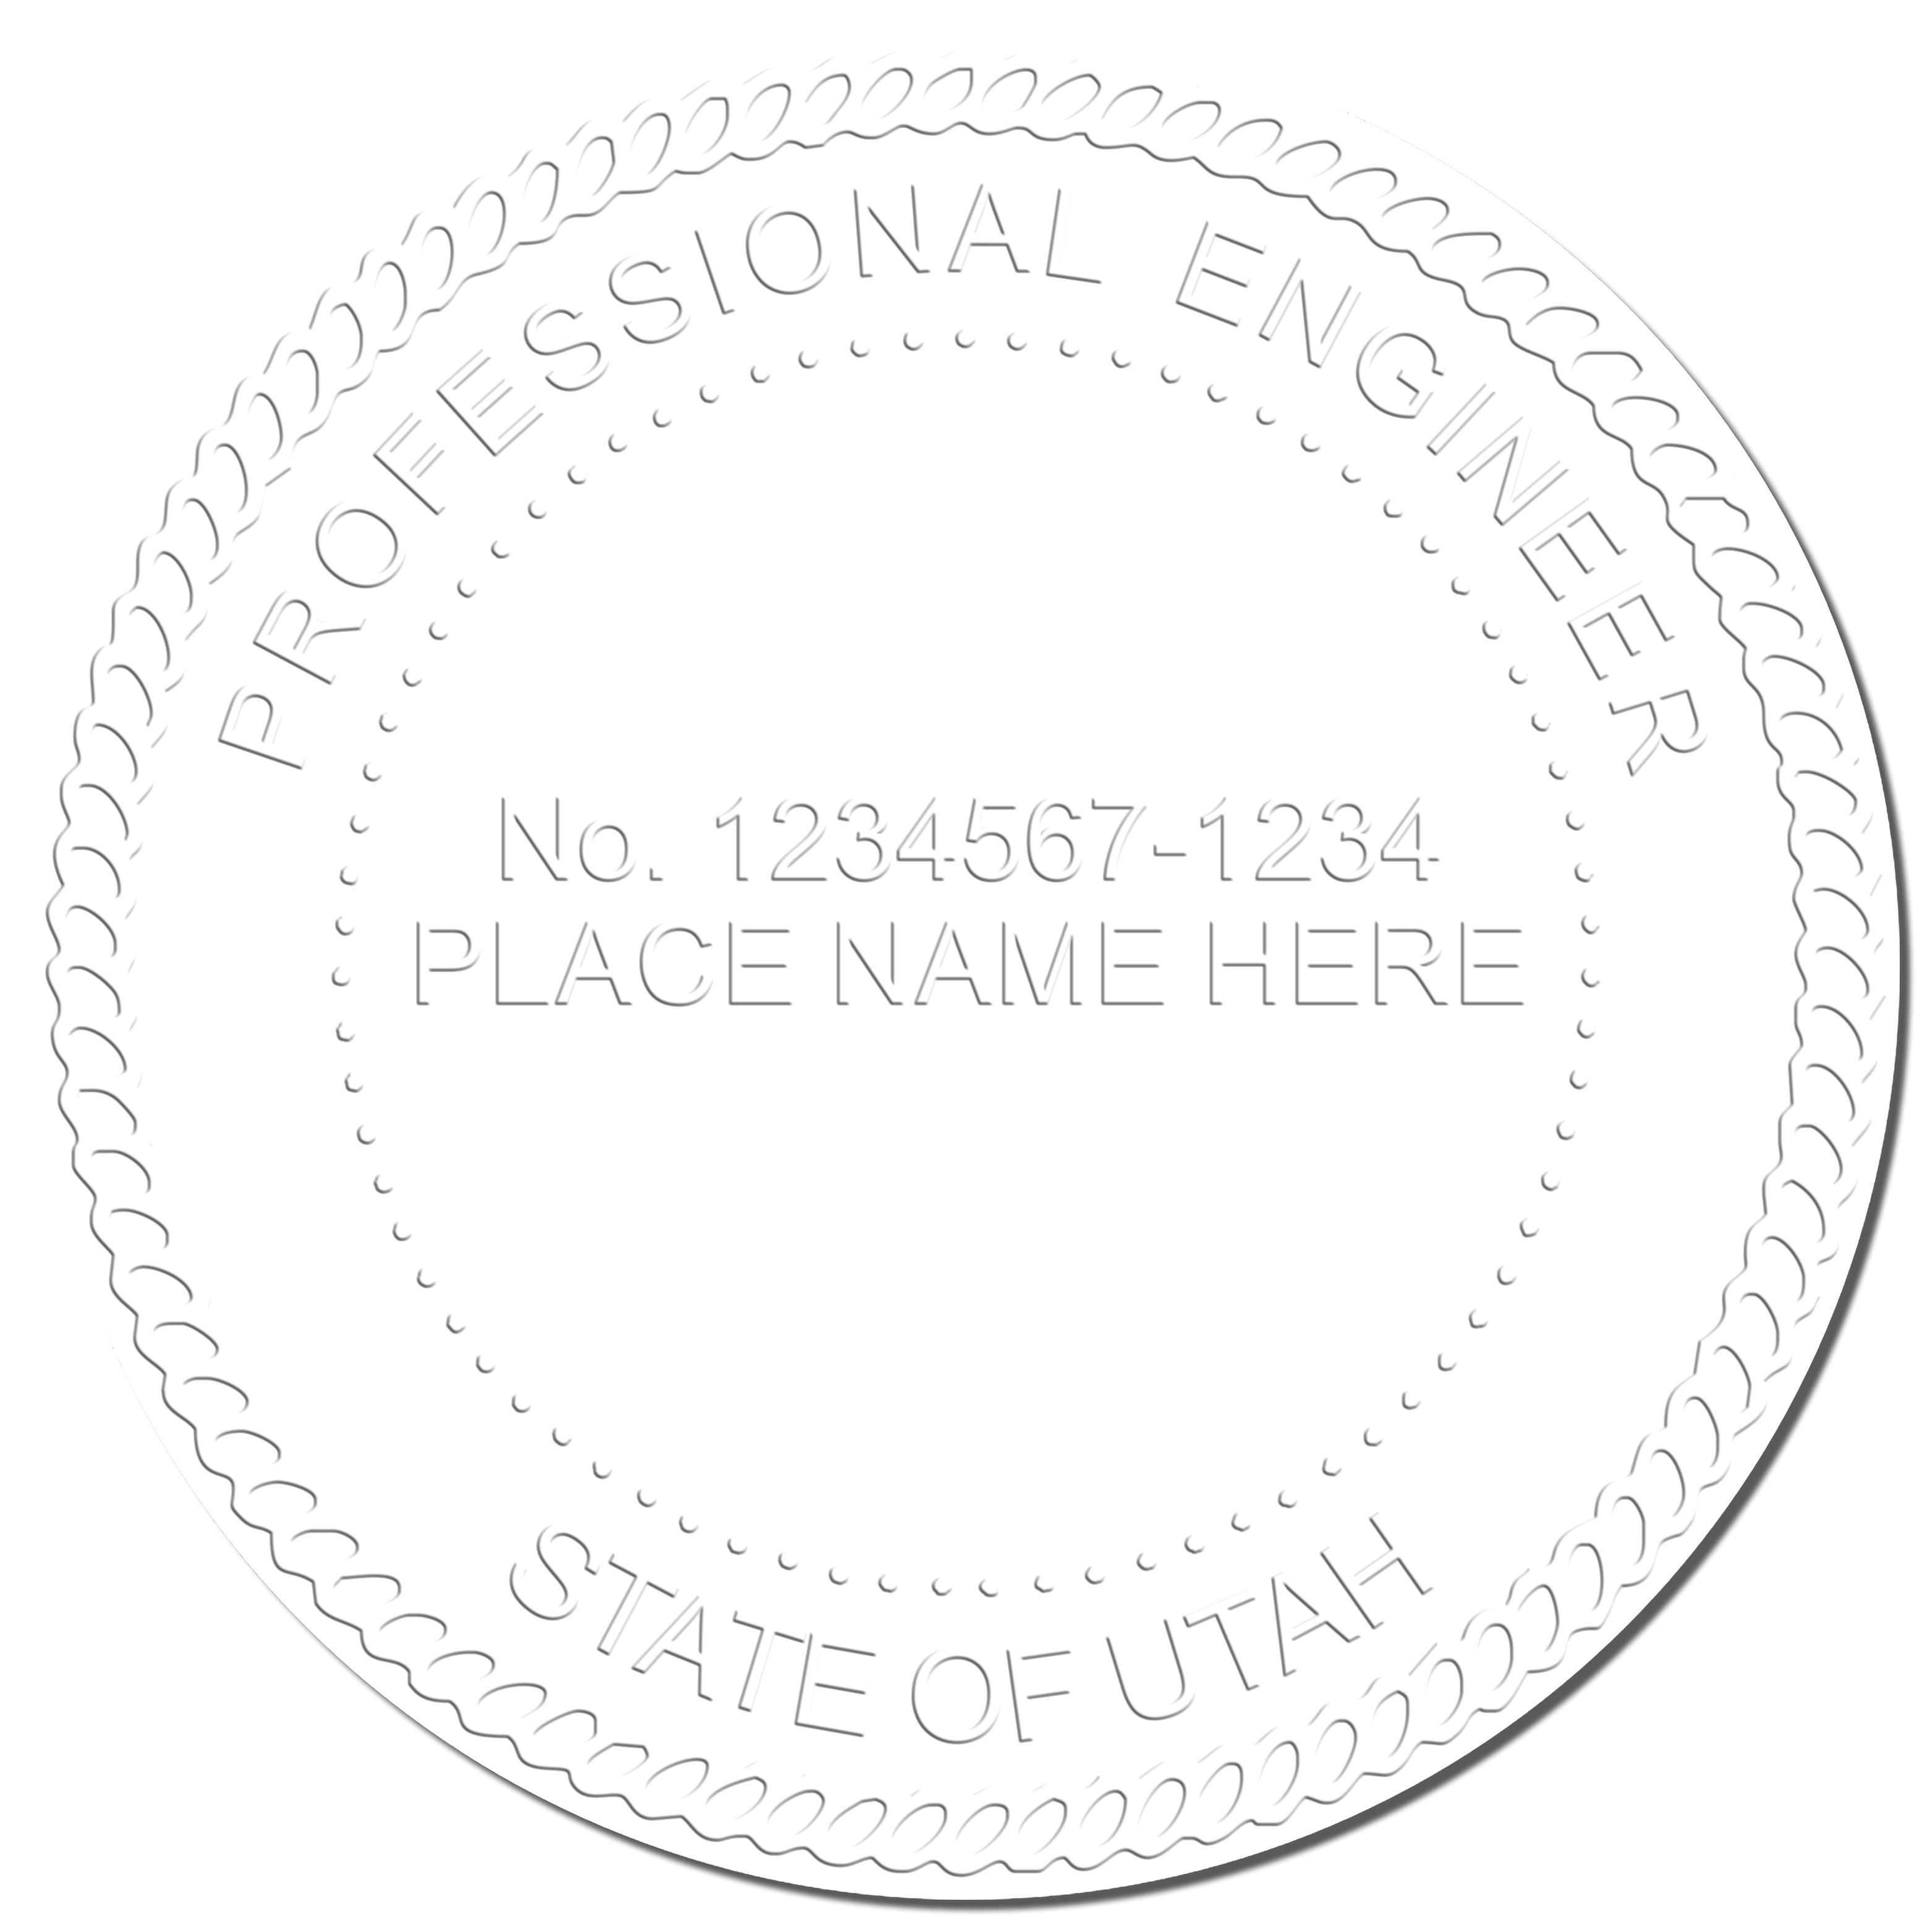 This paper is stamped with a sample imprint of the Gift Utah Engineer Seal, signifying its quality and reliability.